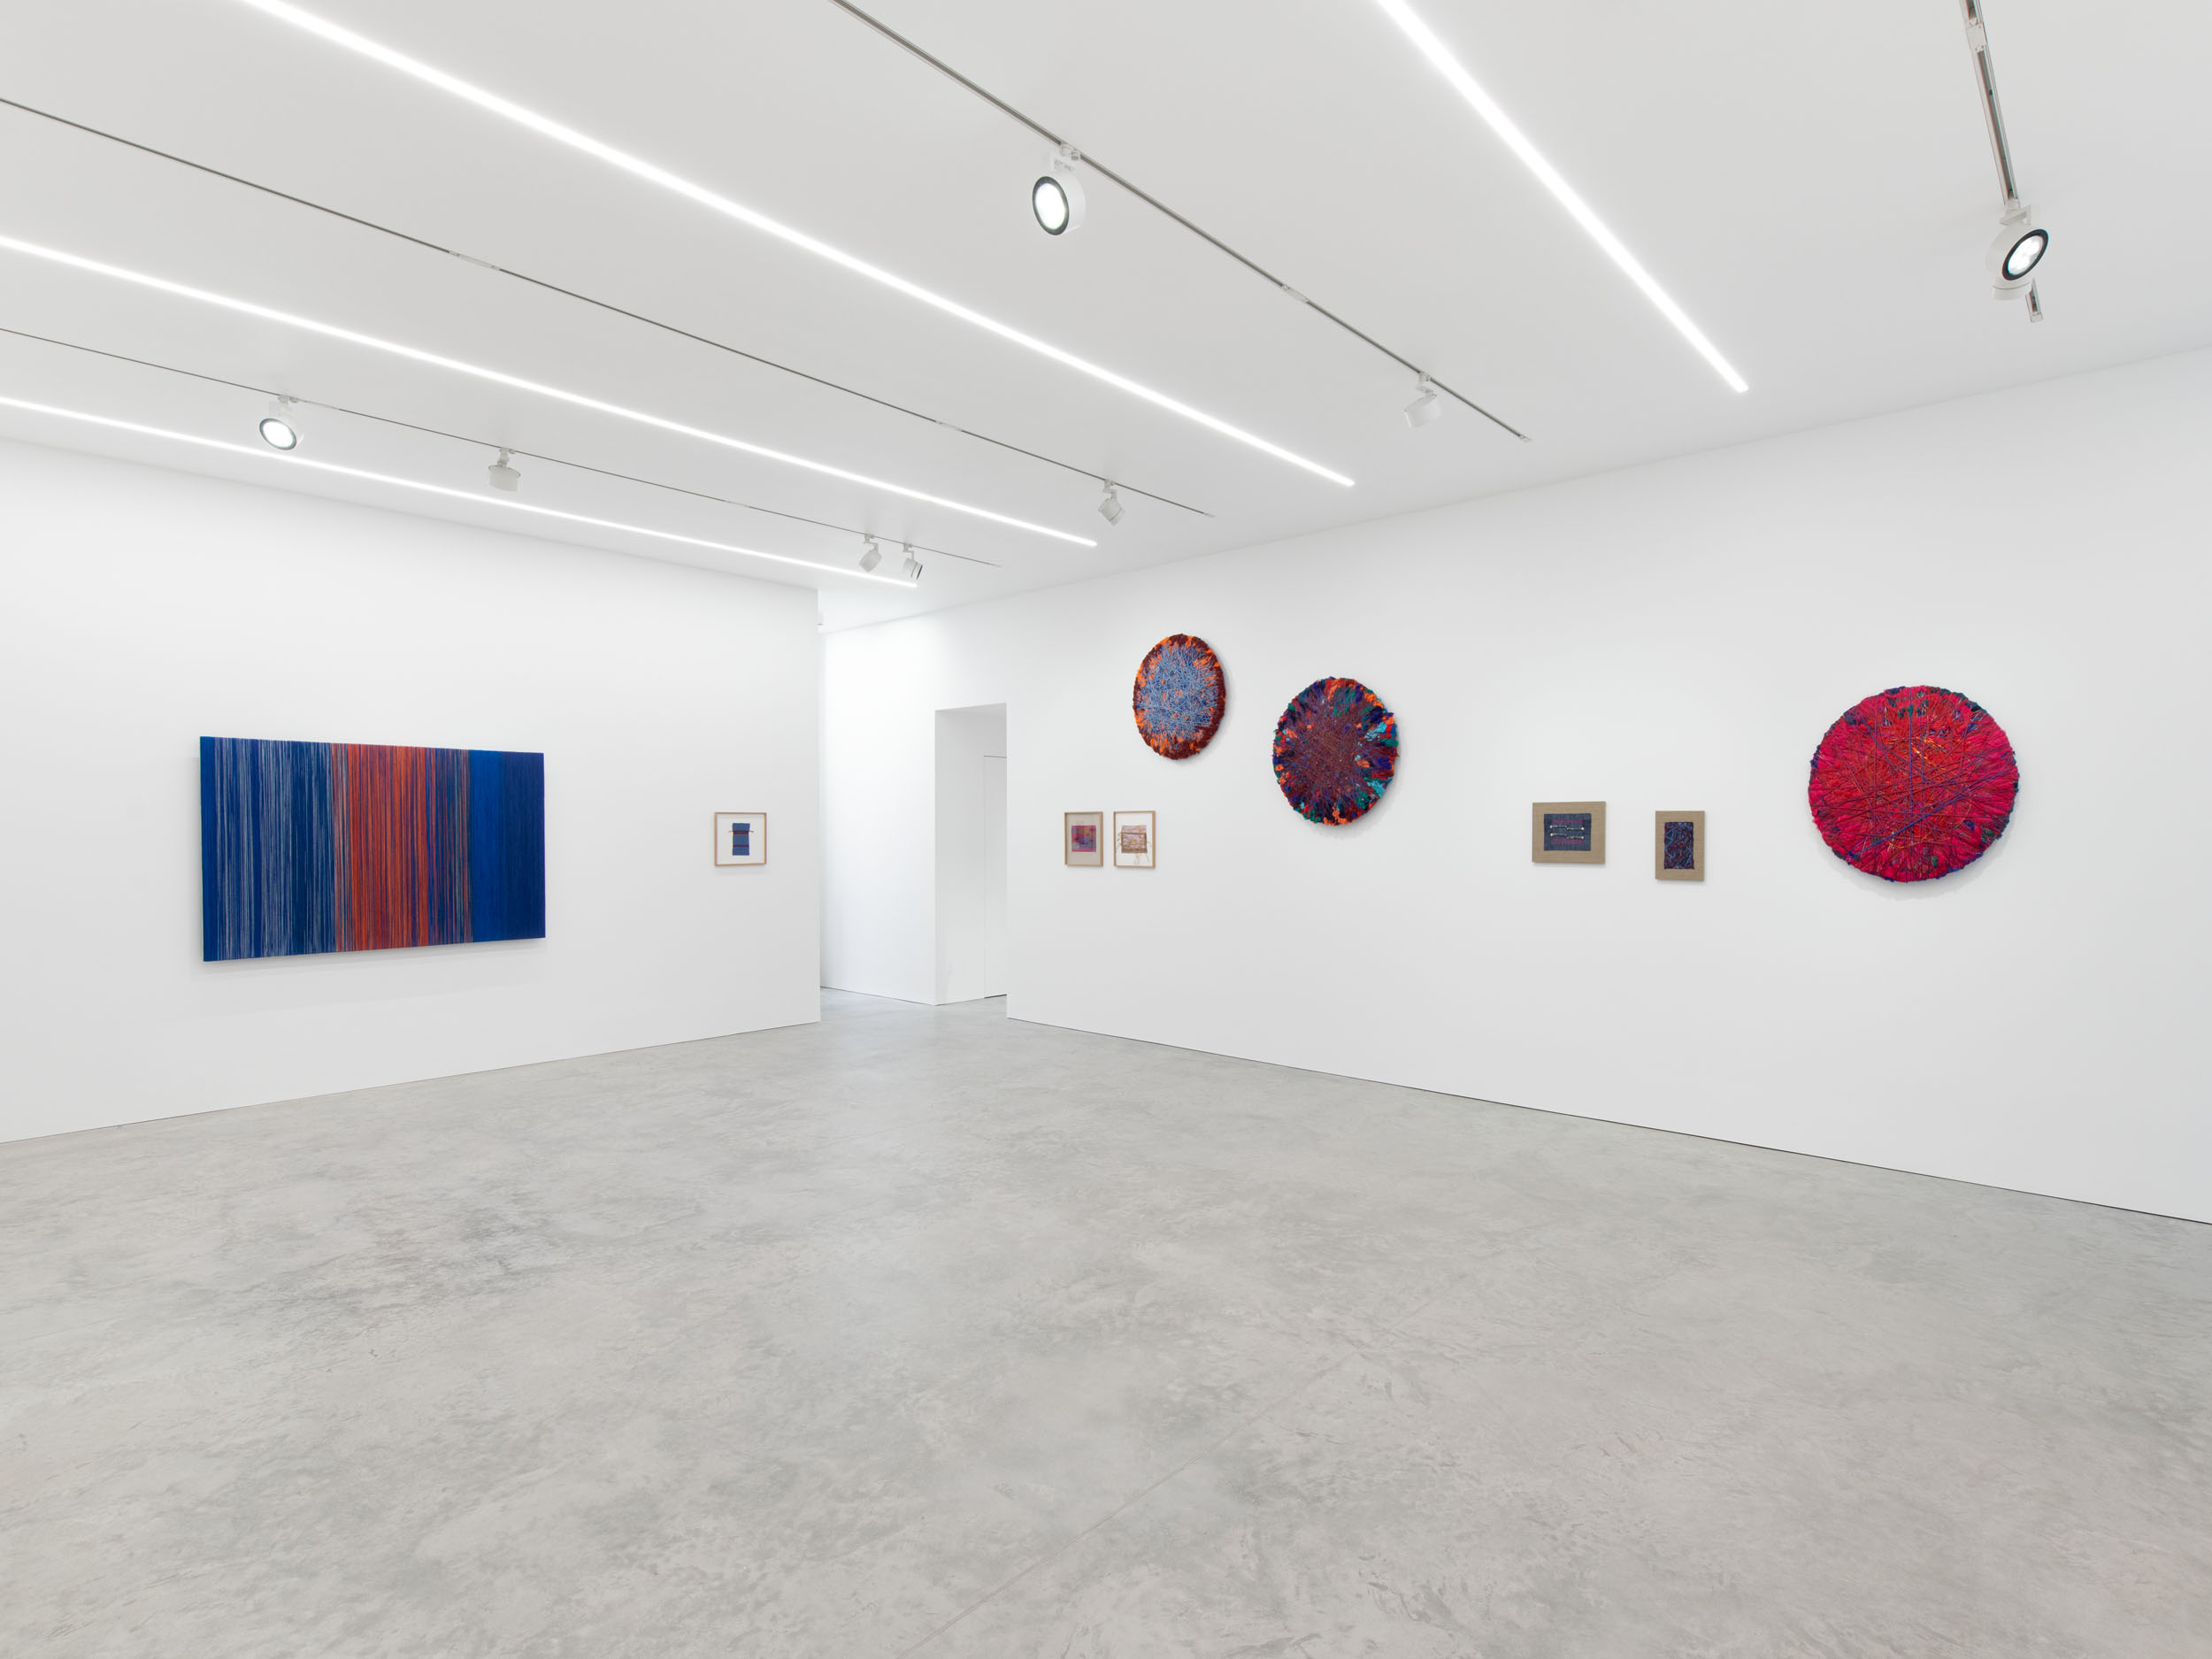 Installation image for Sheila Hicks: Infinite Potential, at Alison Jacques